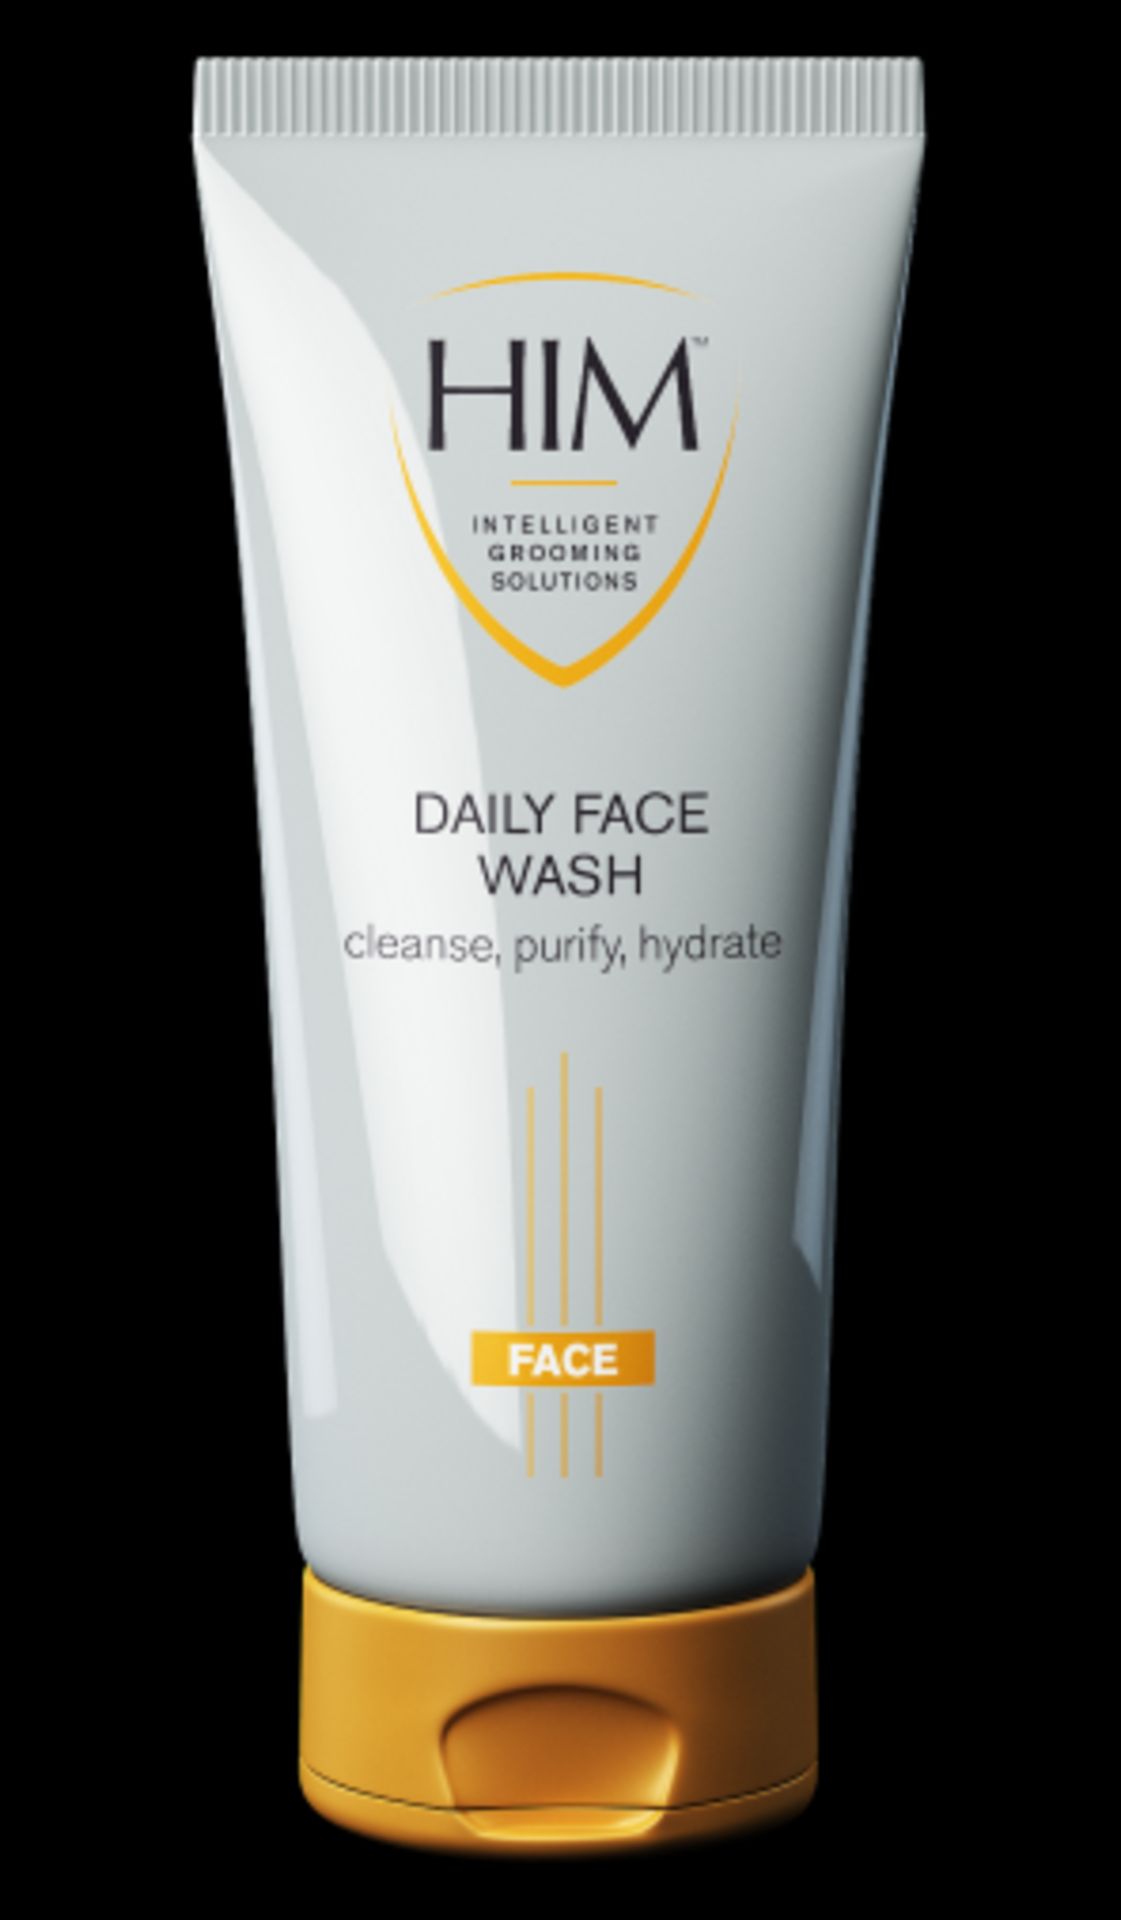 70 x HIM Intelligent Grooming Solutions - 75ml DAILY FACE WASH - Brand New Stock - Cleanse, Purify,